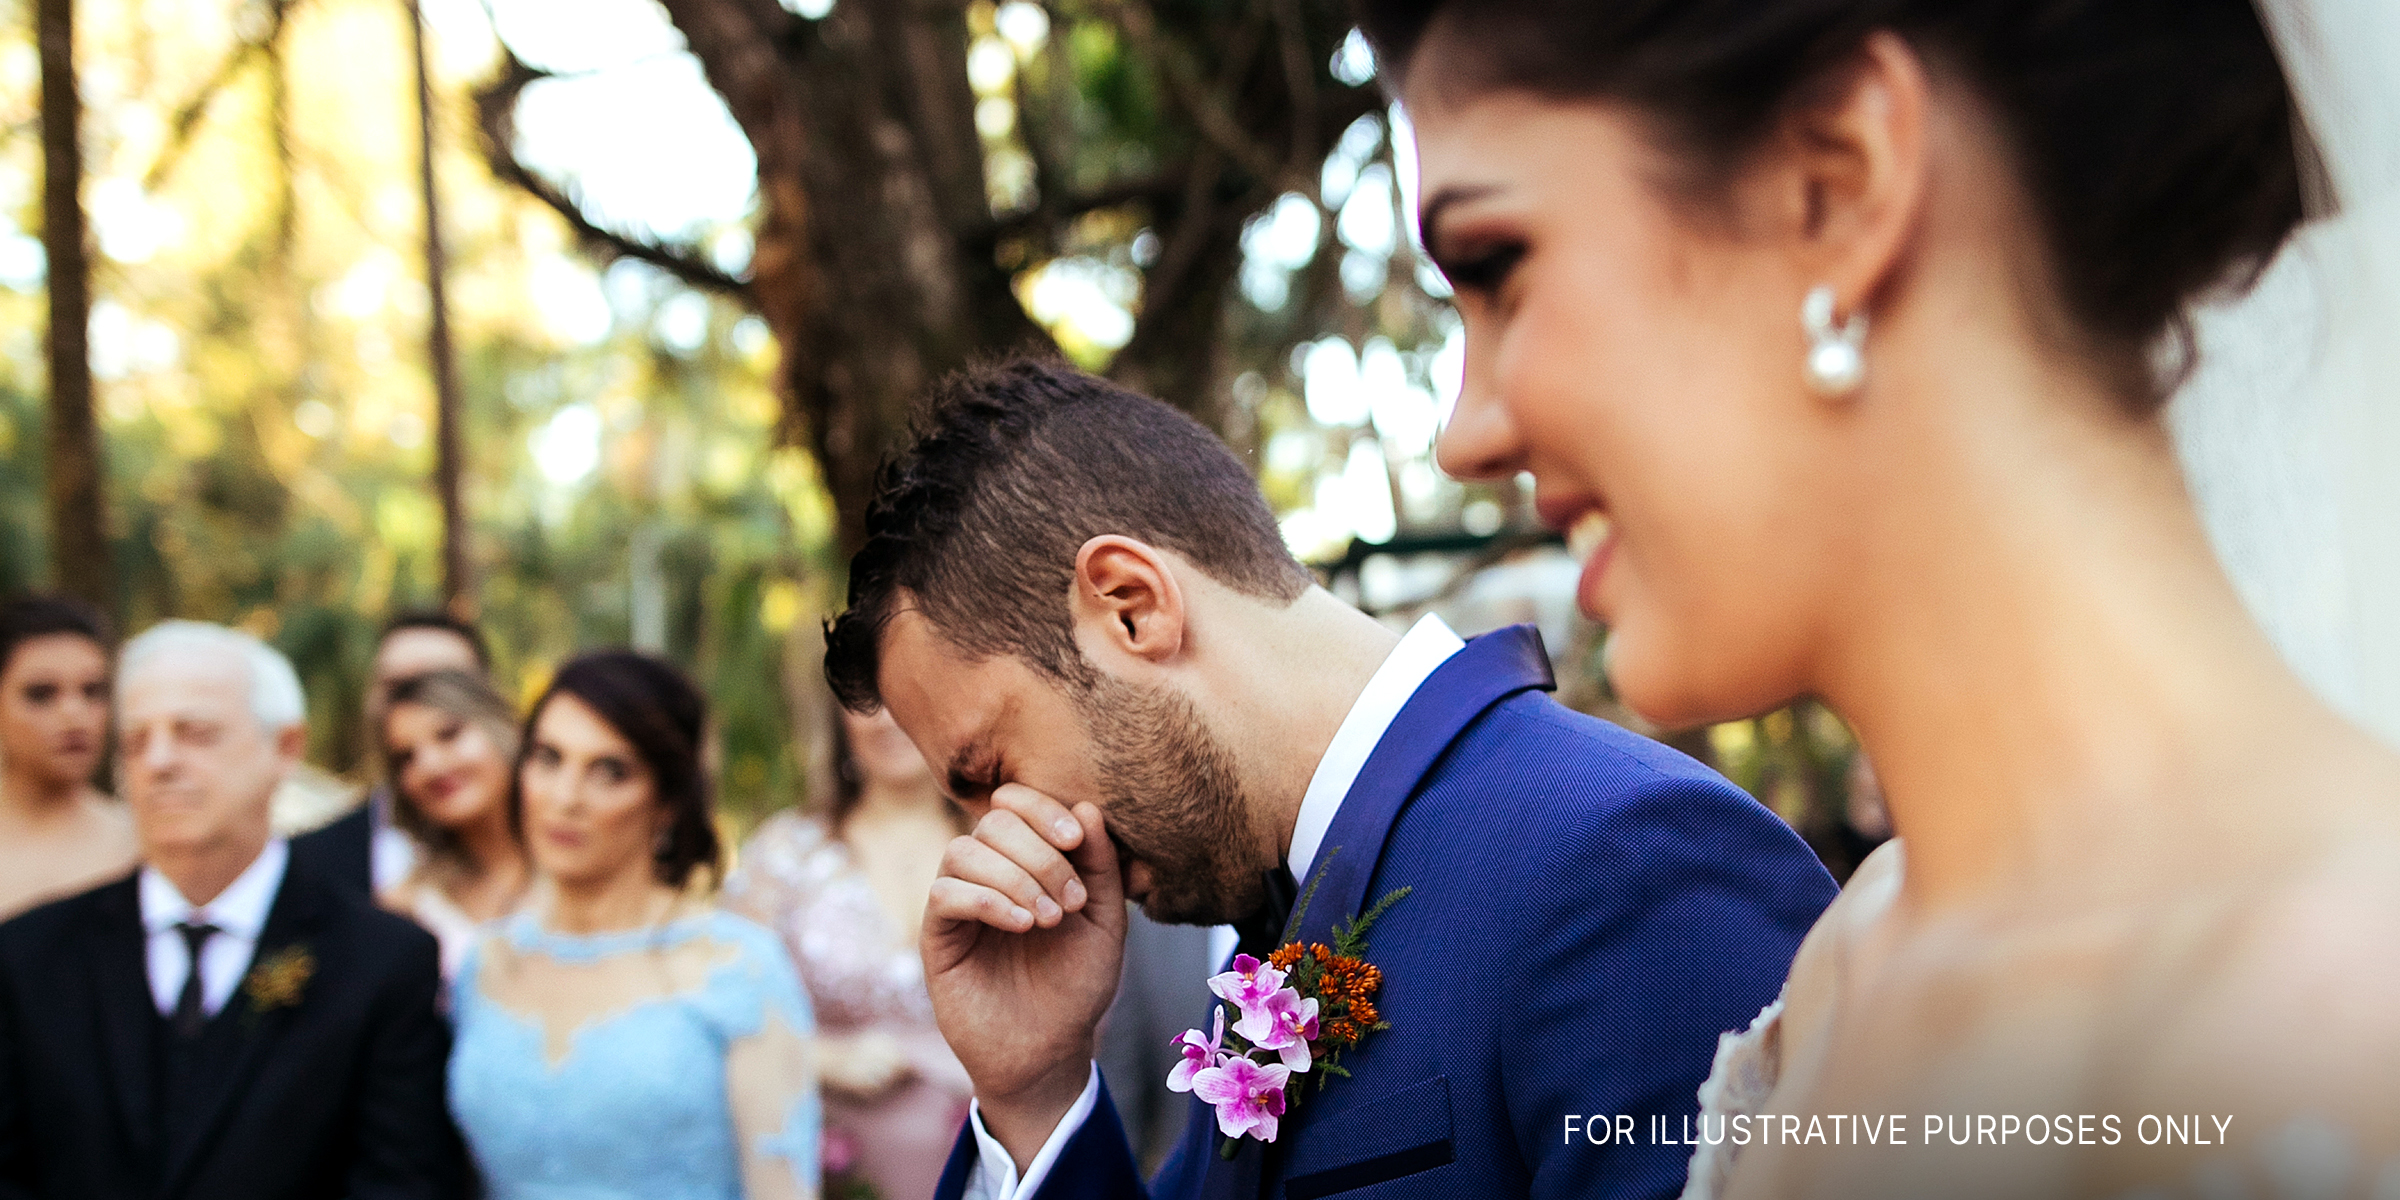 A groom crying next to his smiling bride | Source: Shutterstock